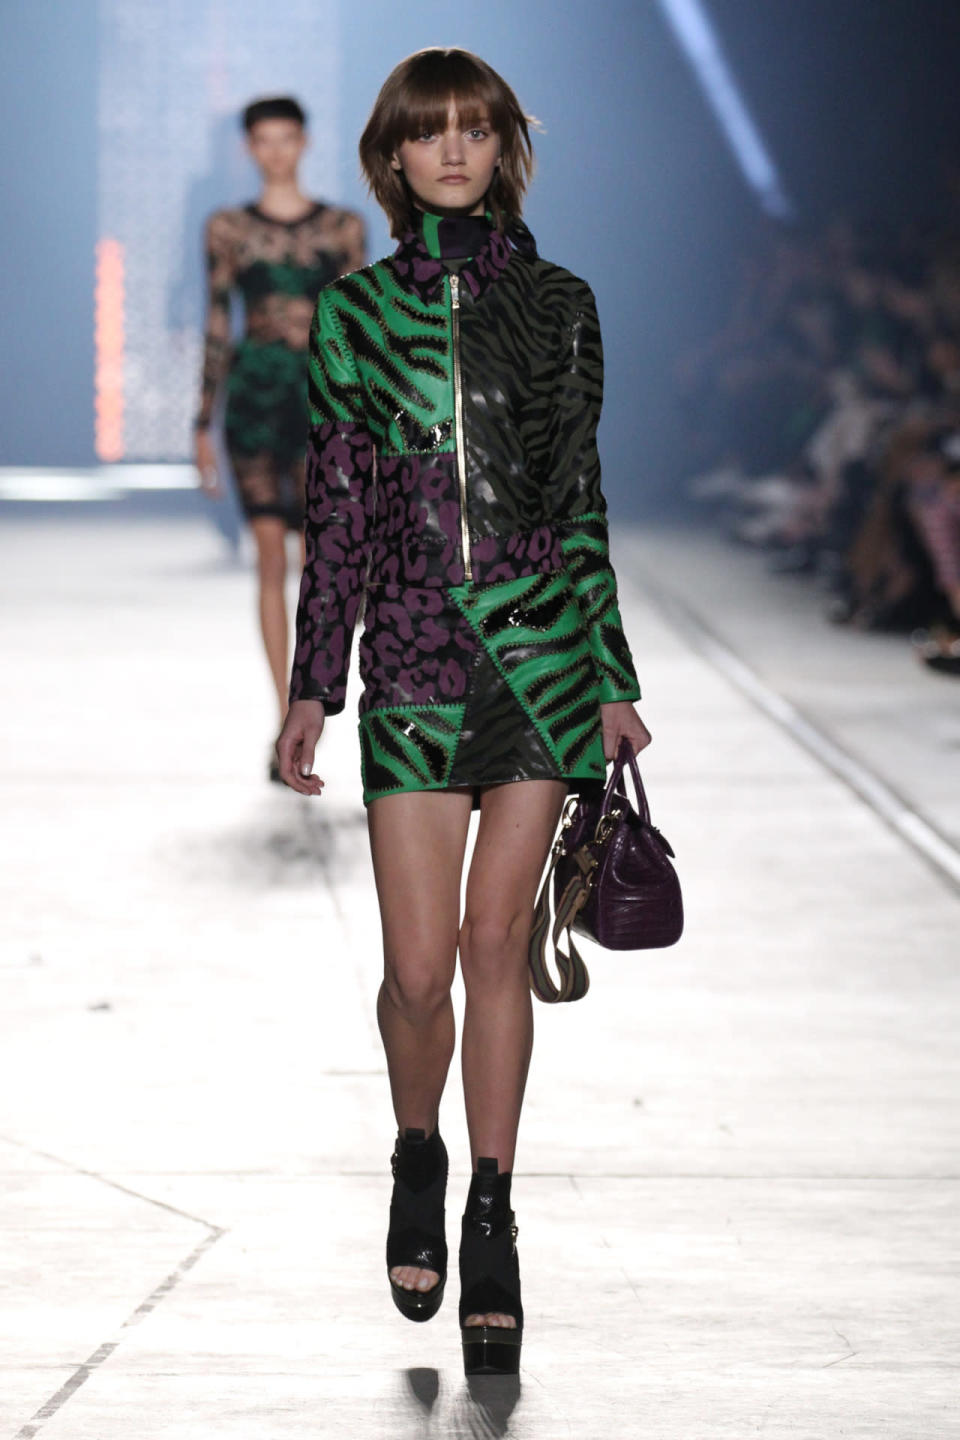 A model wears a matching jacket and miniskirt at Versace’s spring 2016 runway show.